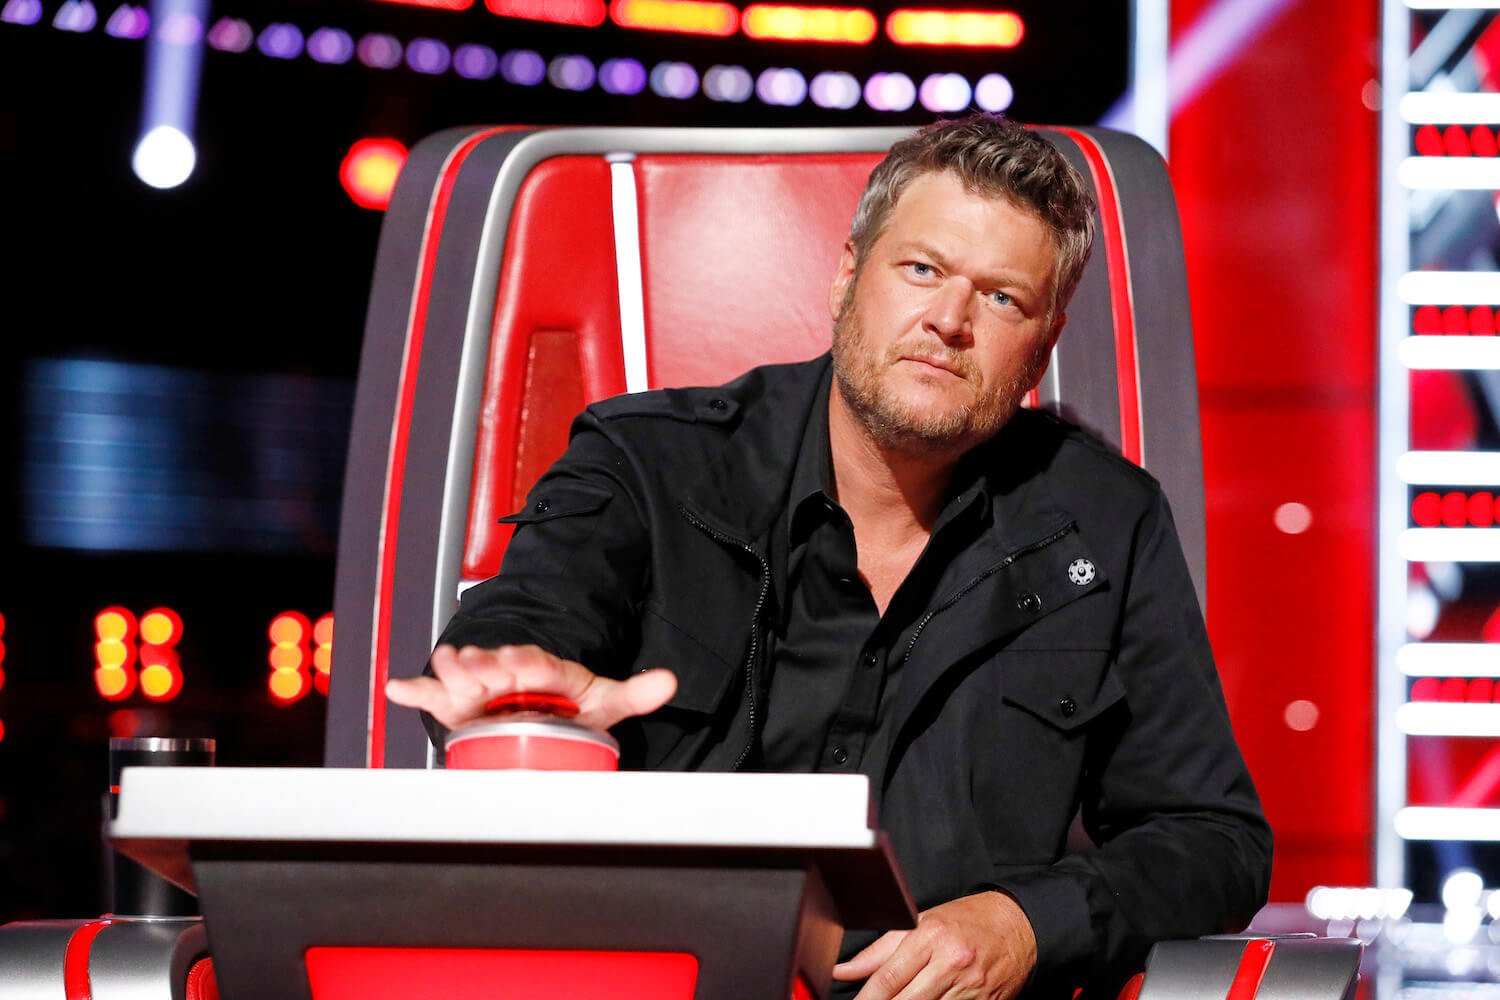 Blake Shelton sitting as a judge on 'The Voice' about to press the red button